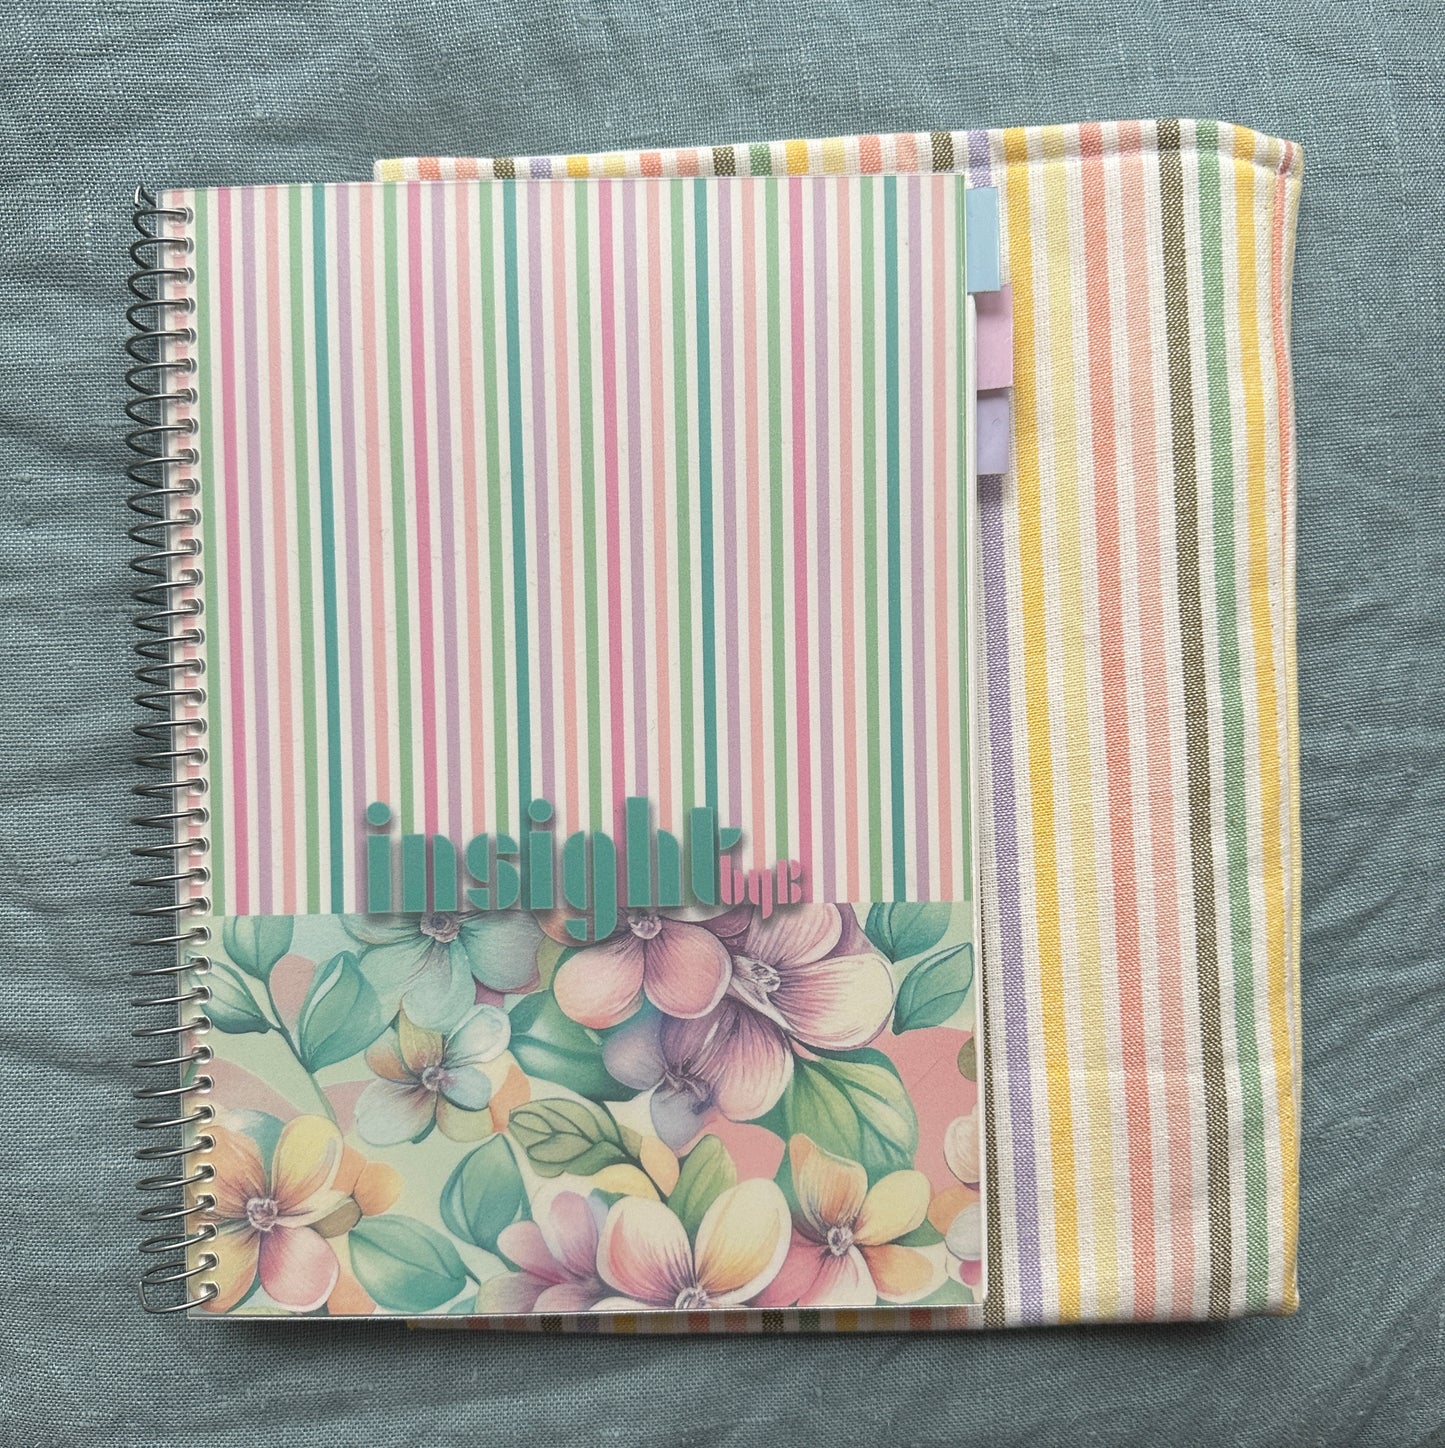 Book Sleeve - fits 20x25 cm planners and books